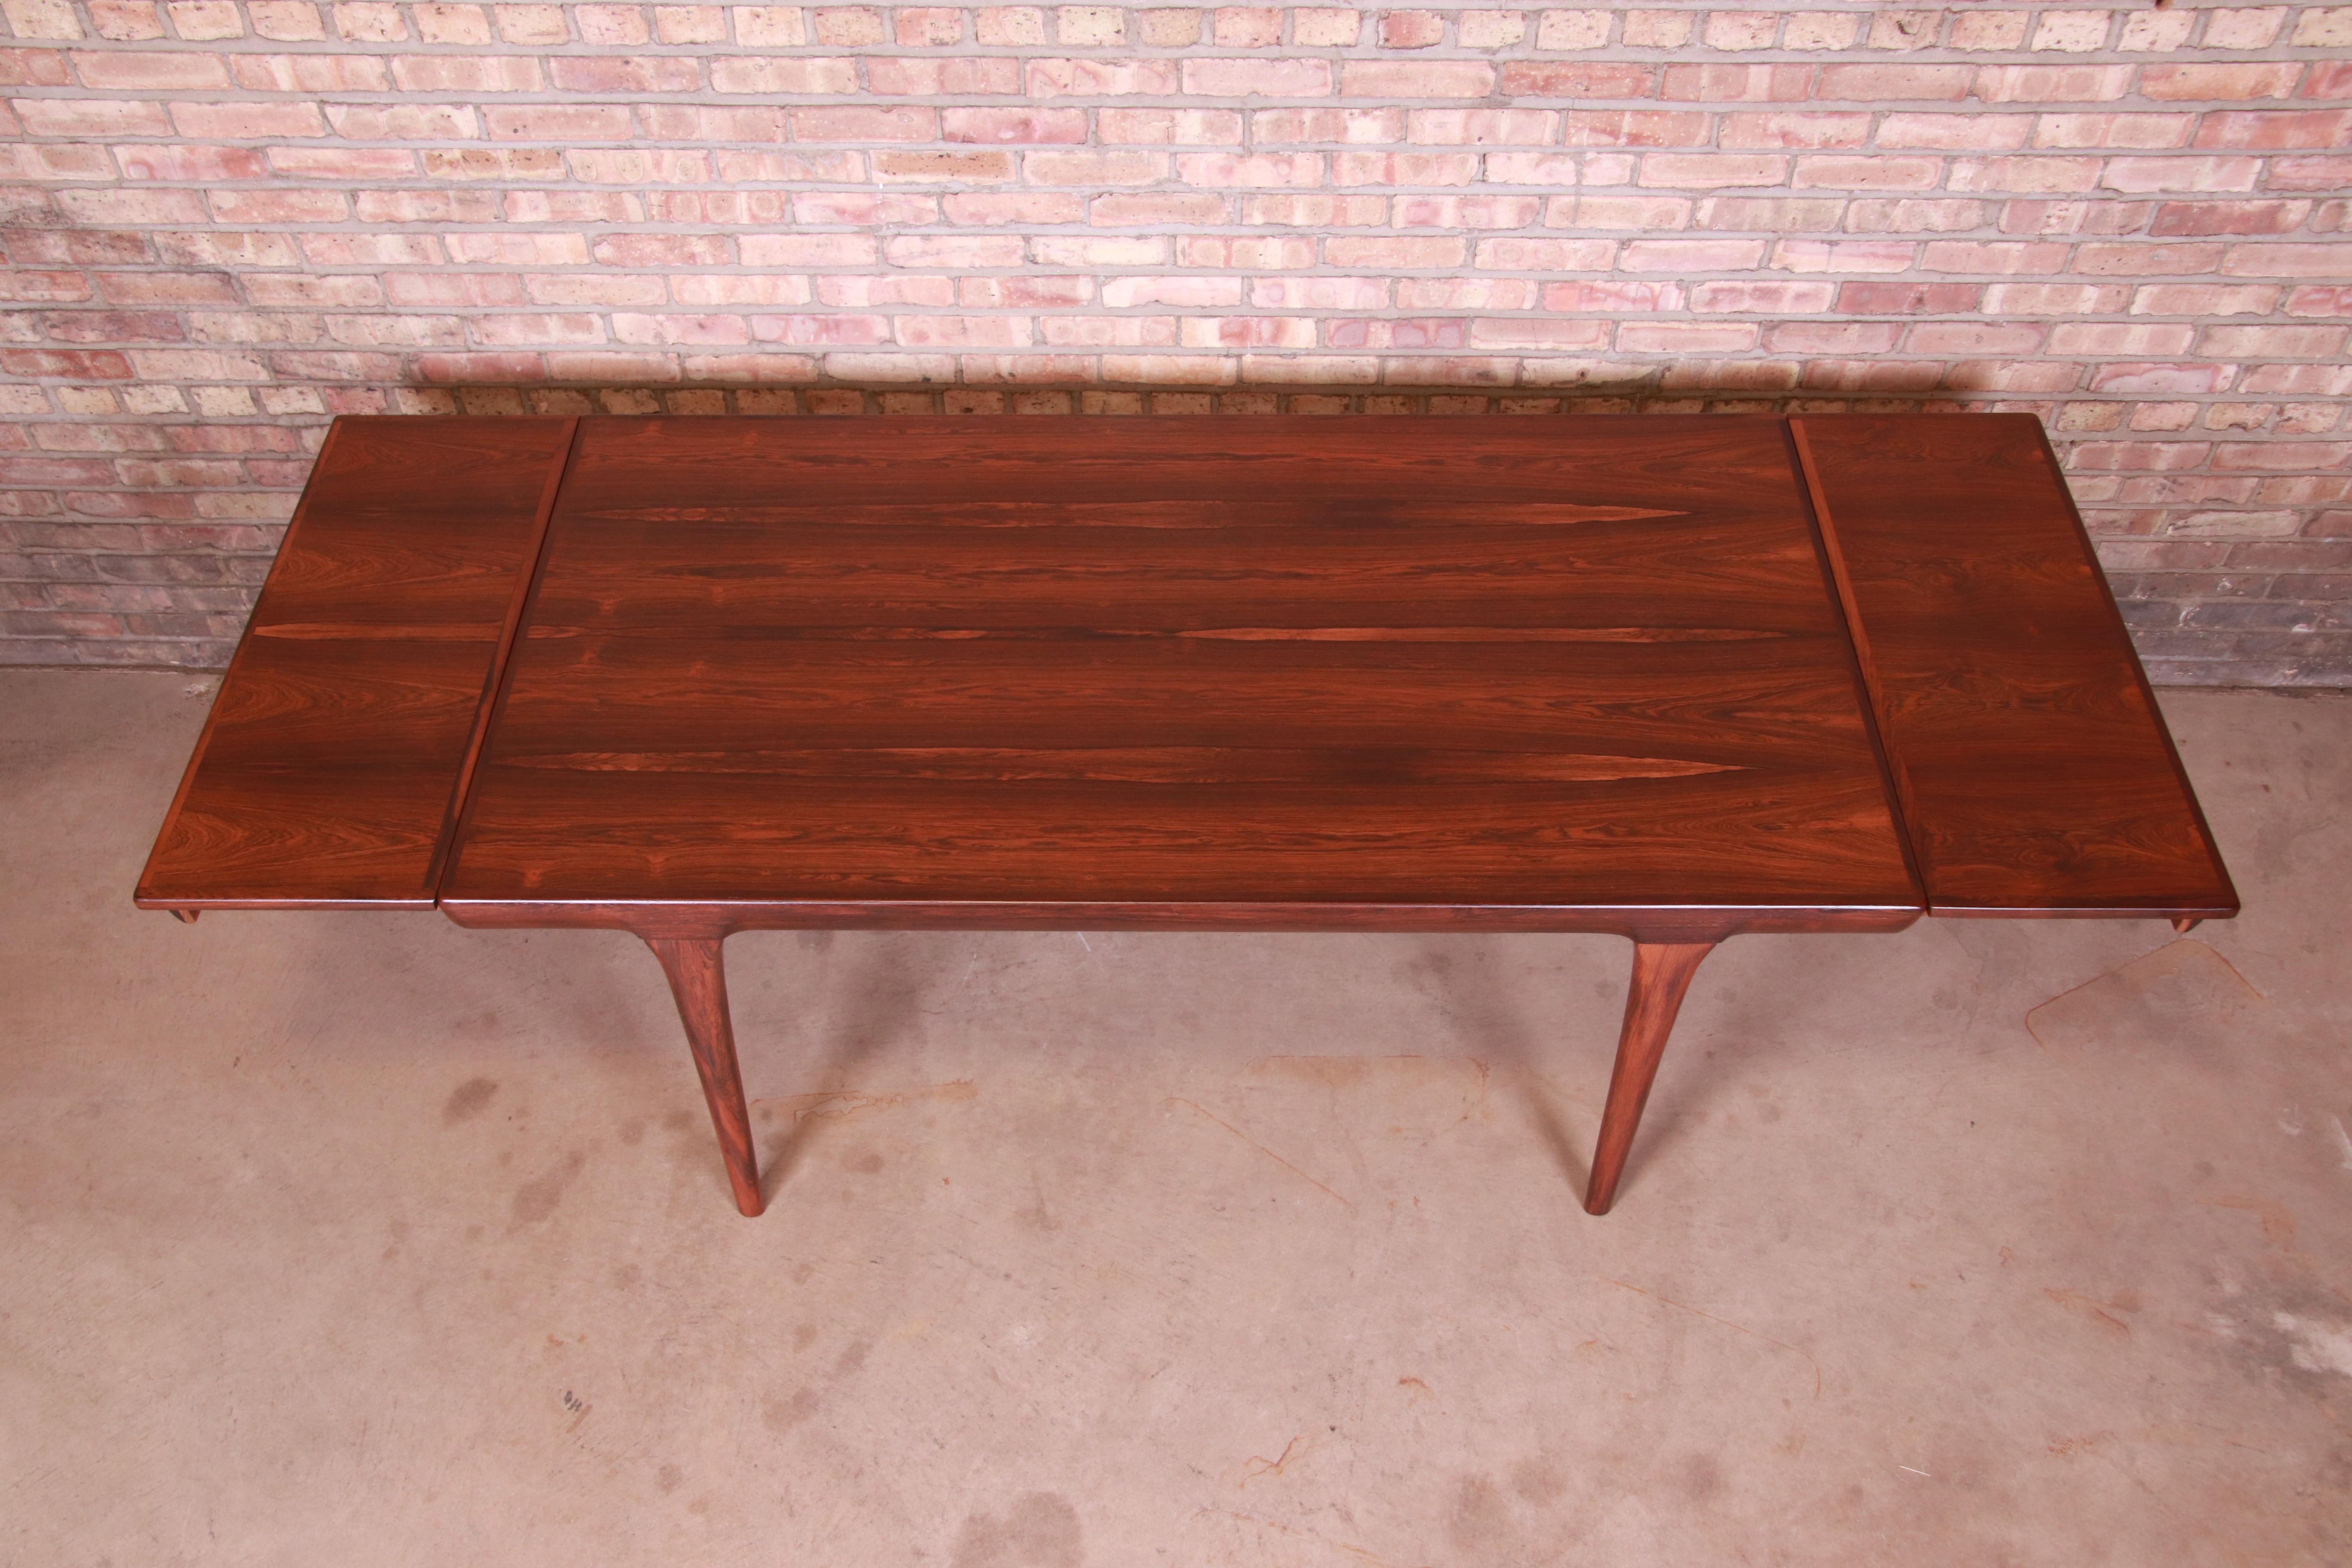 Ib Kofod-Larsen for Faarup Danish Modern Rosewood Dining Table, Newly Refinished For Sale 11